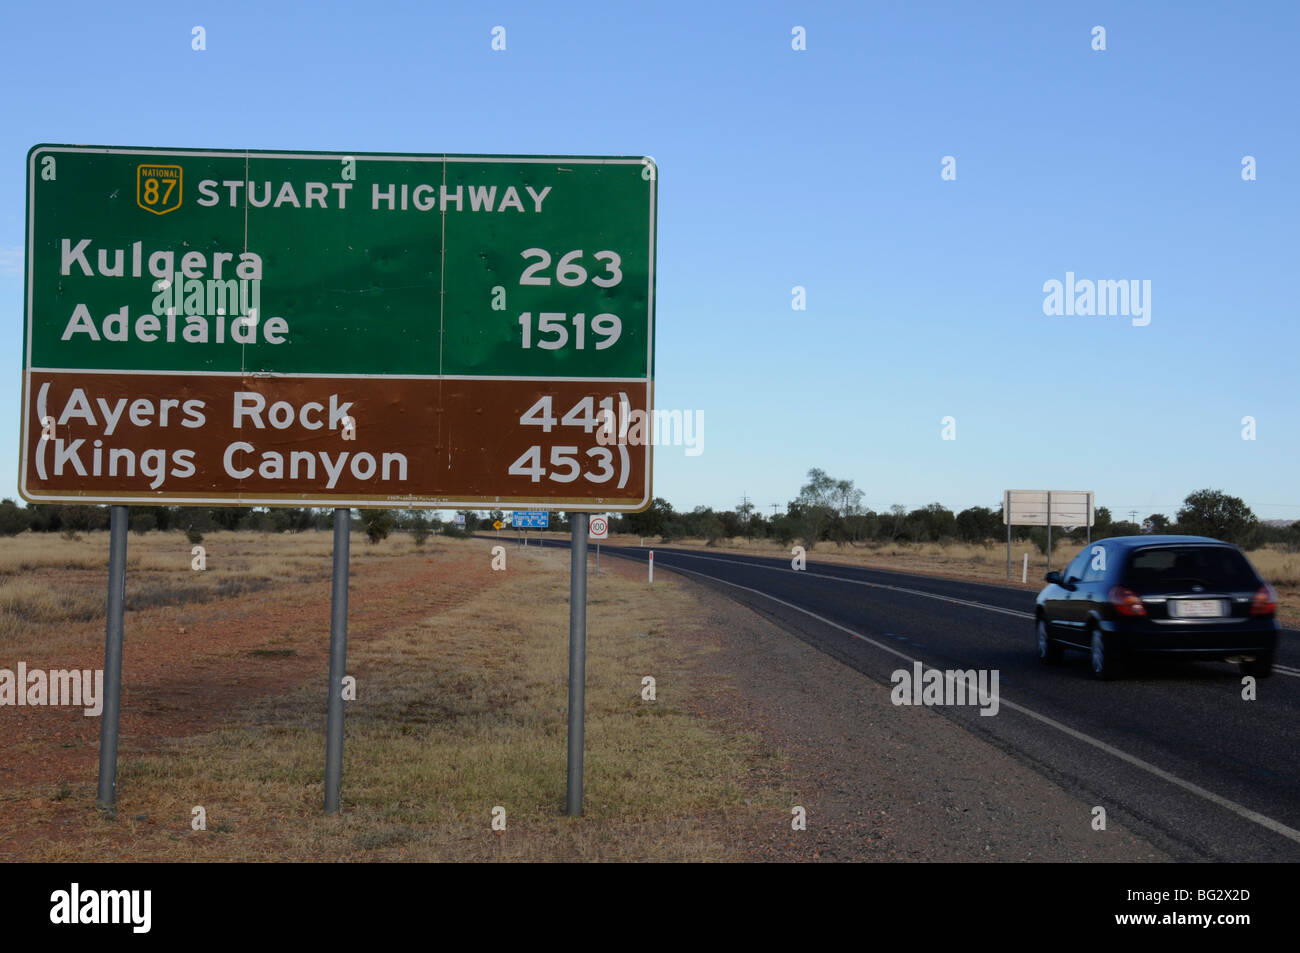 A road sign on the Stuart highway in the Northern Territory ,Australia Stock Photo